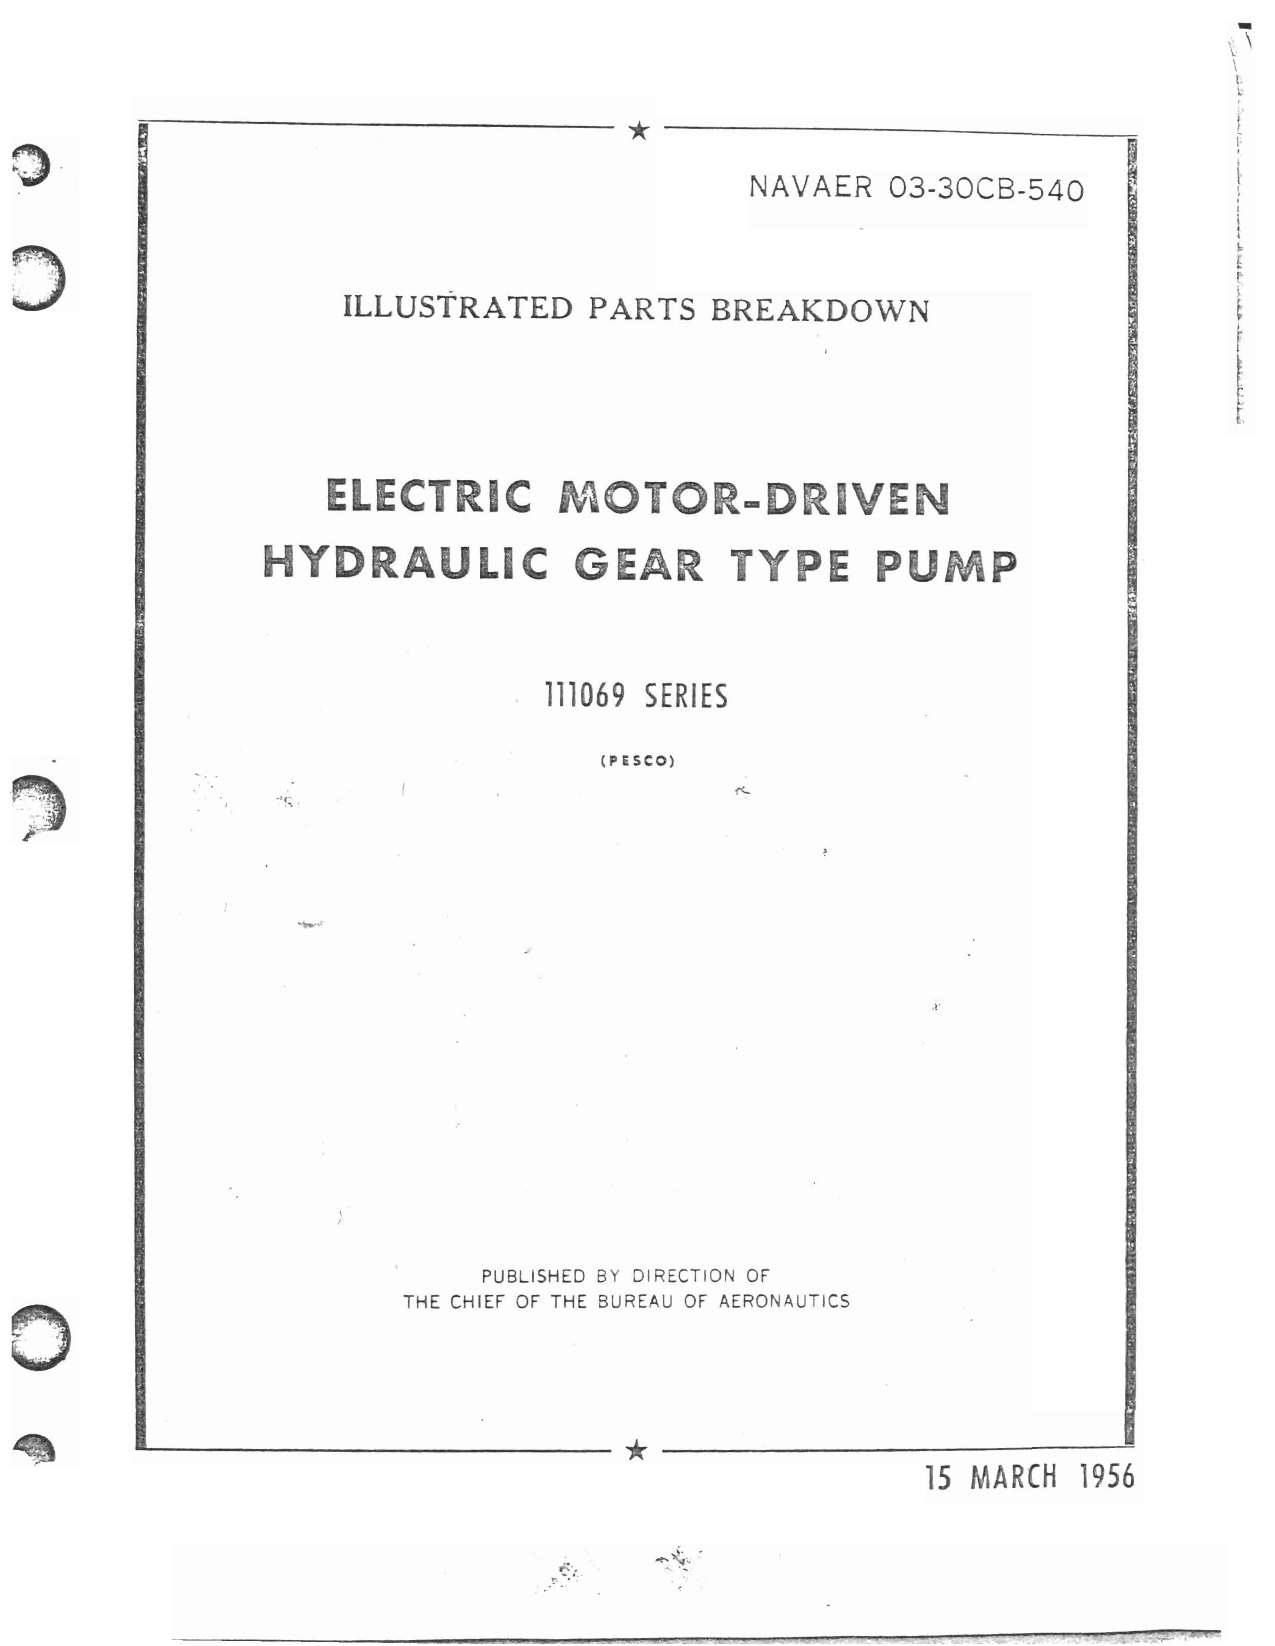 Sample page 1 from AirCorps Library document: Illustrated Parts Breakdown for Electric Motor-Driven Hydraulic Gear Type Pump - 111069 Series 